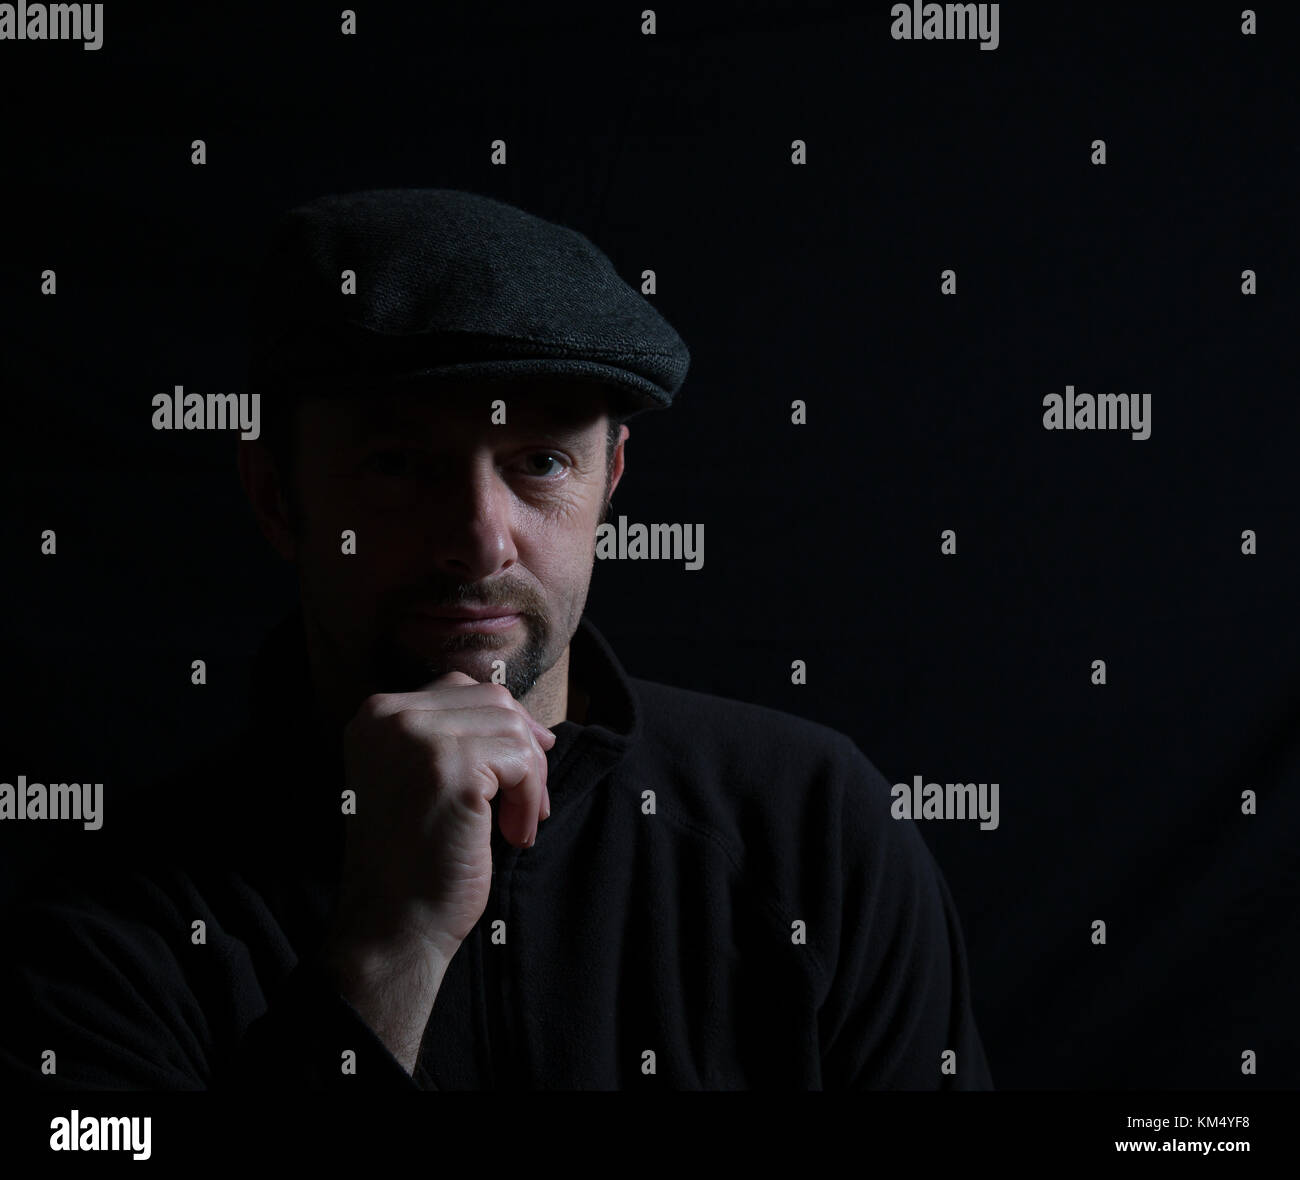 Artistic portrait of isolated man in dark cap, half-lit face, staring at camera, hand on chin, in spotlight. Subtle lighting creates a shadowed image. Stock Photo